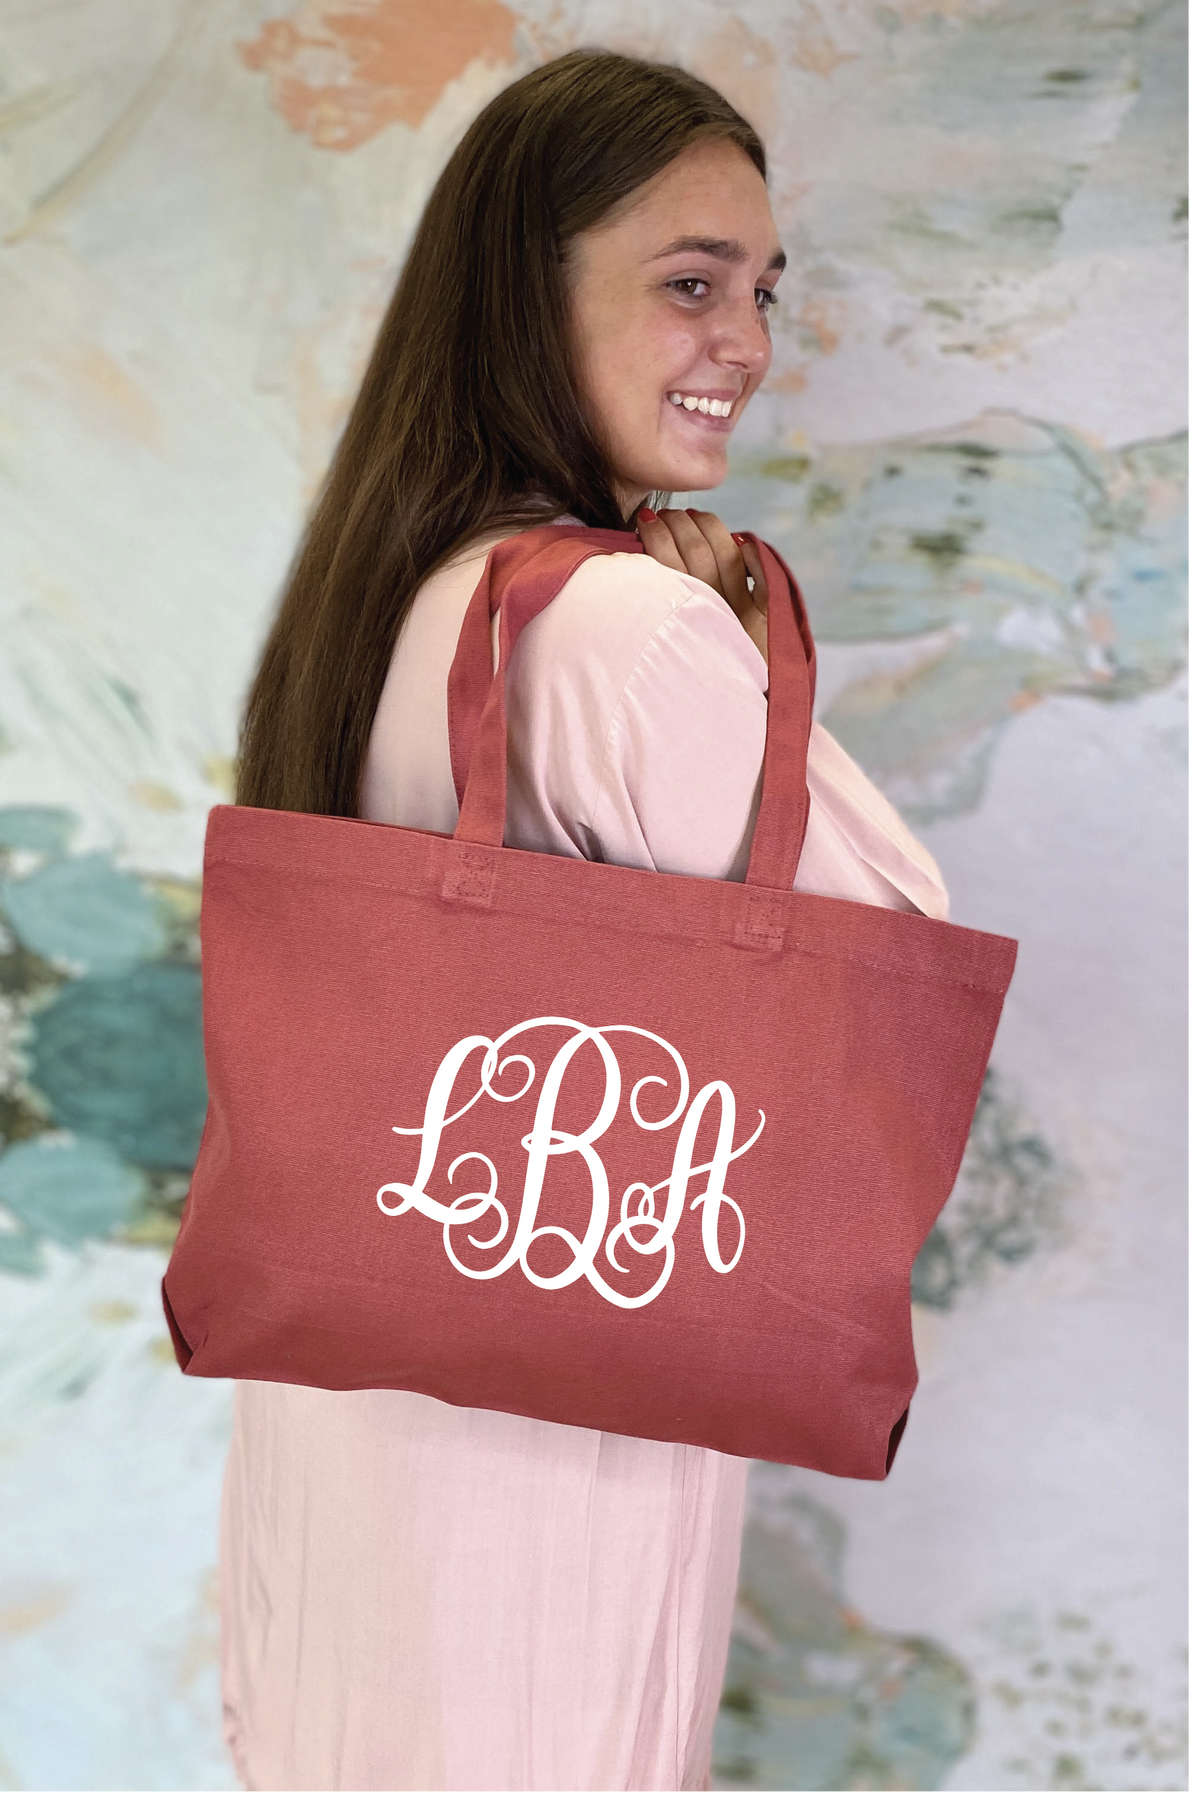 Monogrammed Tote Bags | Personalized Tote Bag for Bridesmaids Terra Cotta Red Tote Bag with 3 Letter Vine Monogram